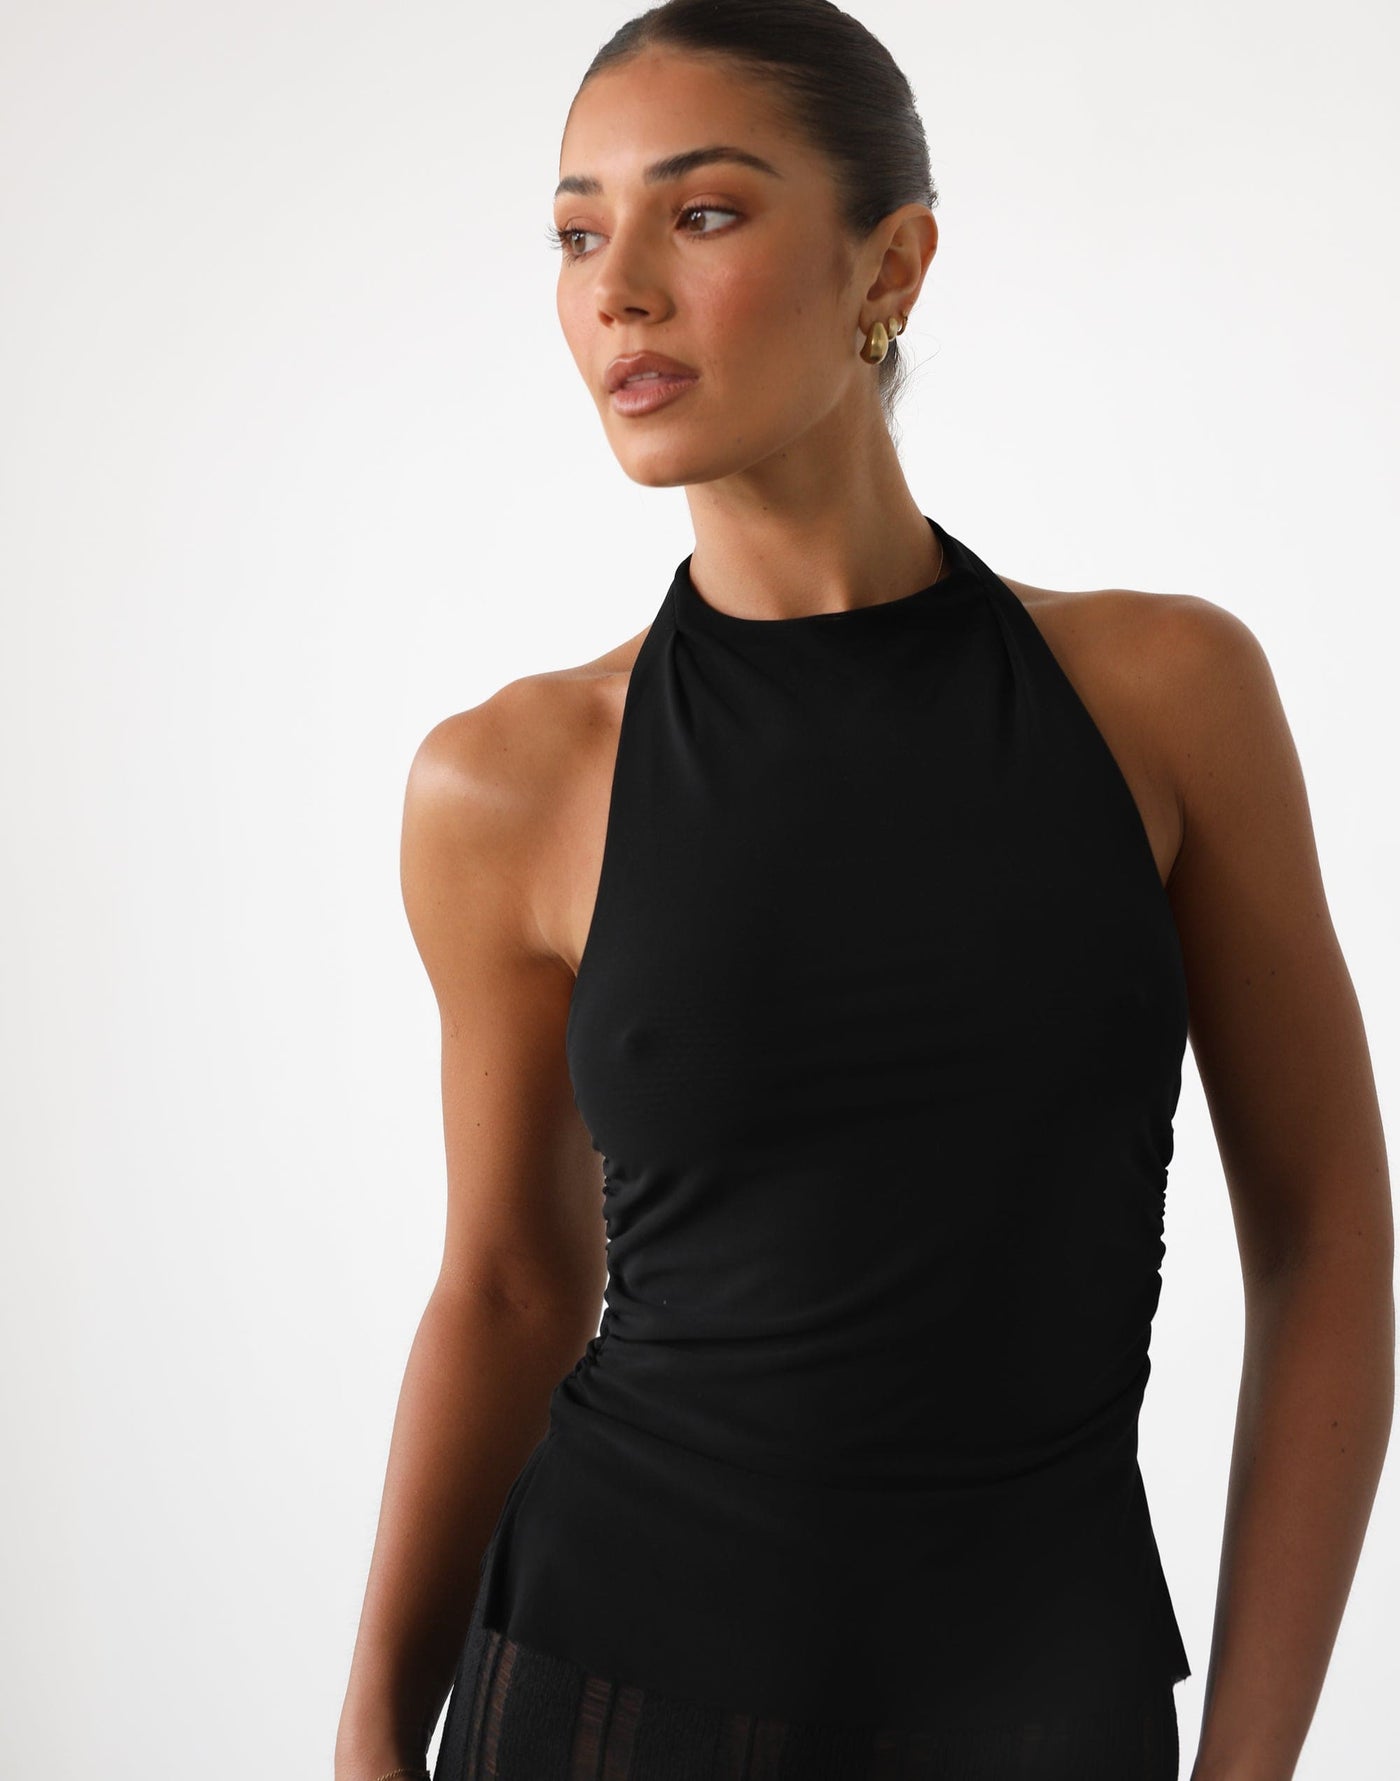 Kaytee Top (Black) | High Neck Ruched Top - Women's Top - Charcoal Clothing